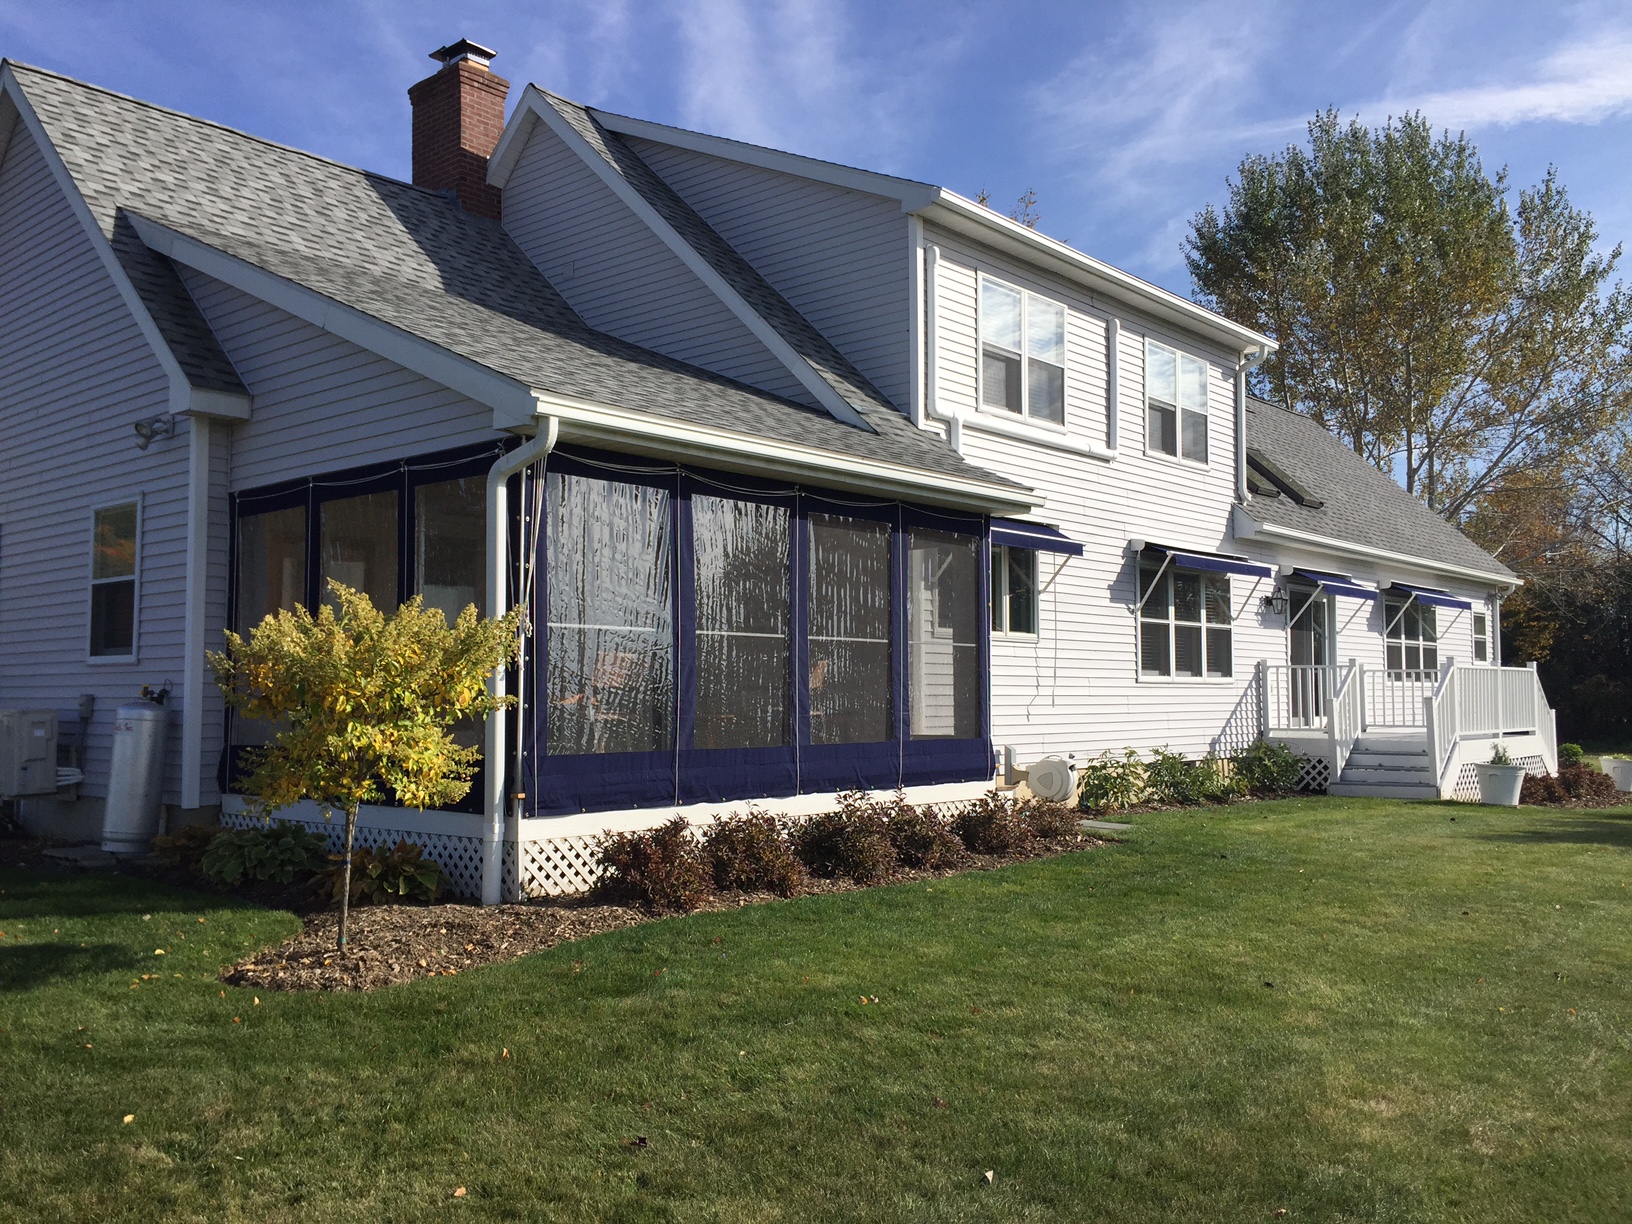 Cape style house with gray siding and blue window and porch curtains.